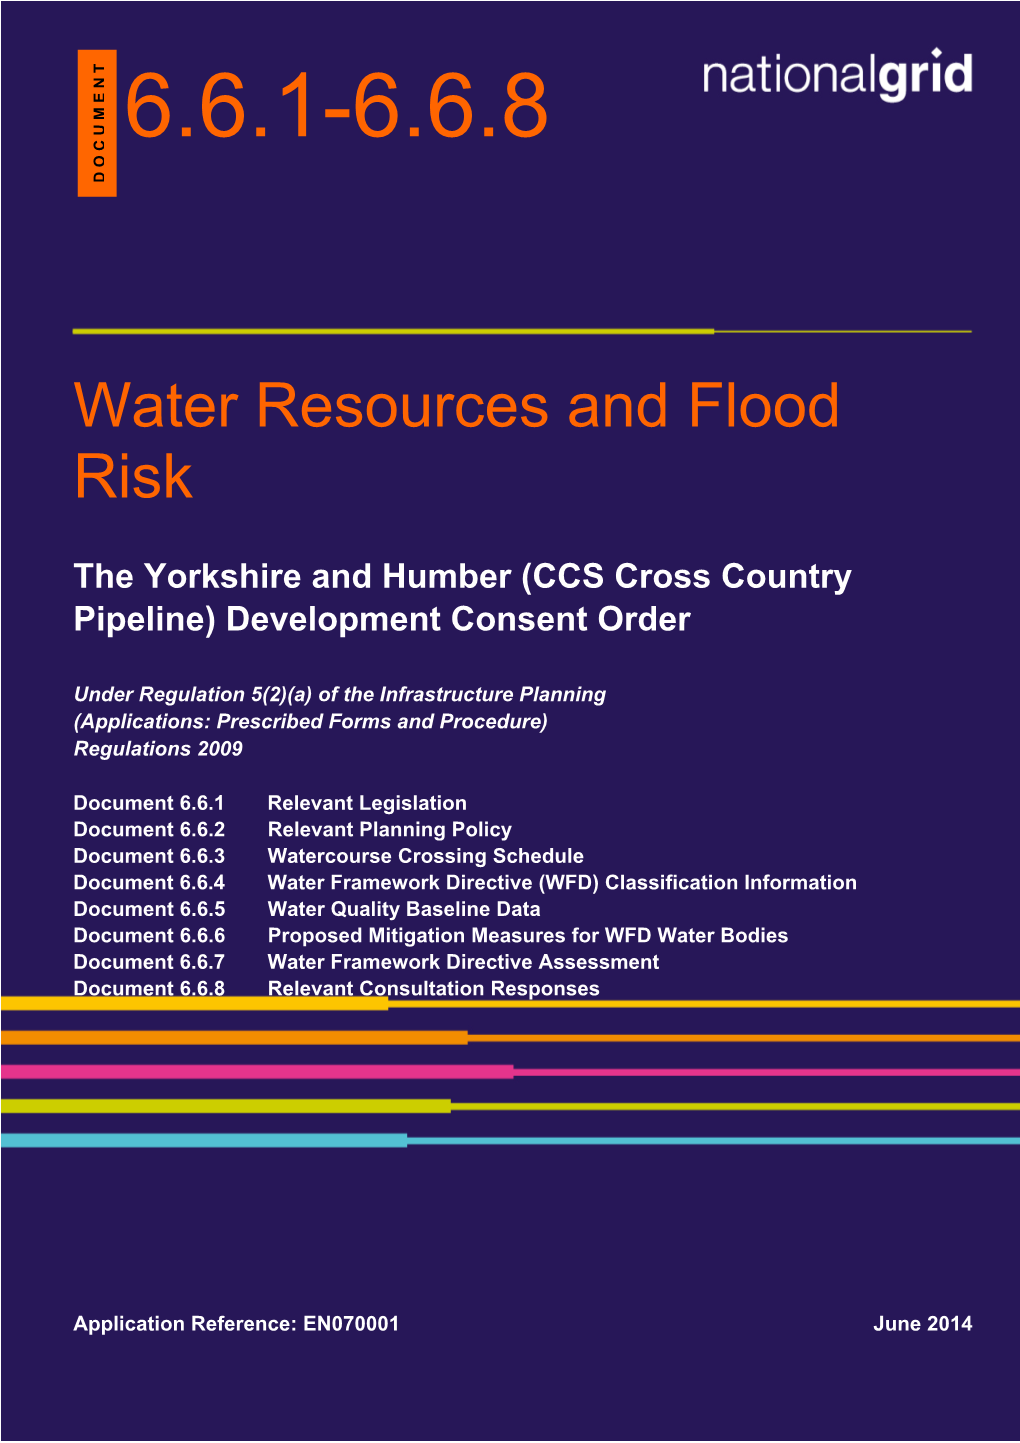 Water Resources and Flood Risk 1 Environmental Statement Document 6.6.1